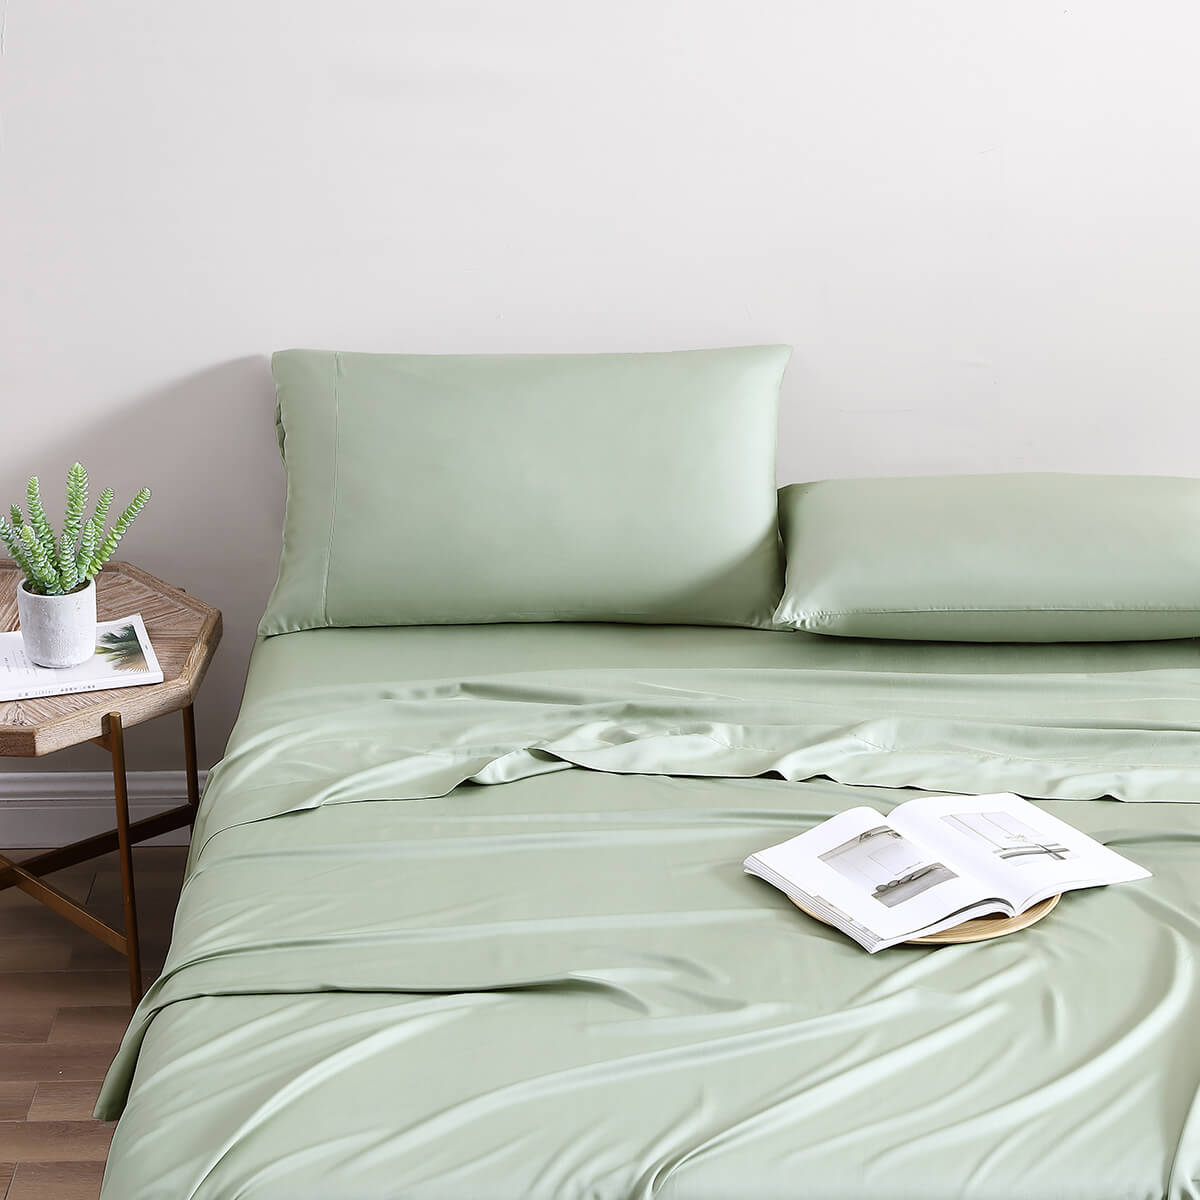 Bamboo Bedding: Sunday Citizen creates the most amazing bamboo sheets online.